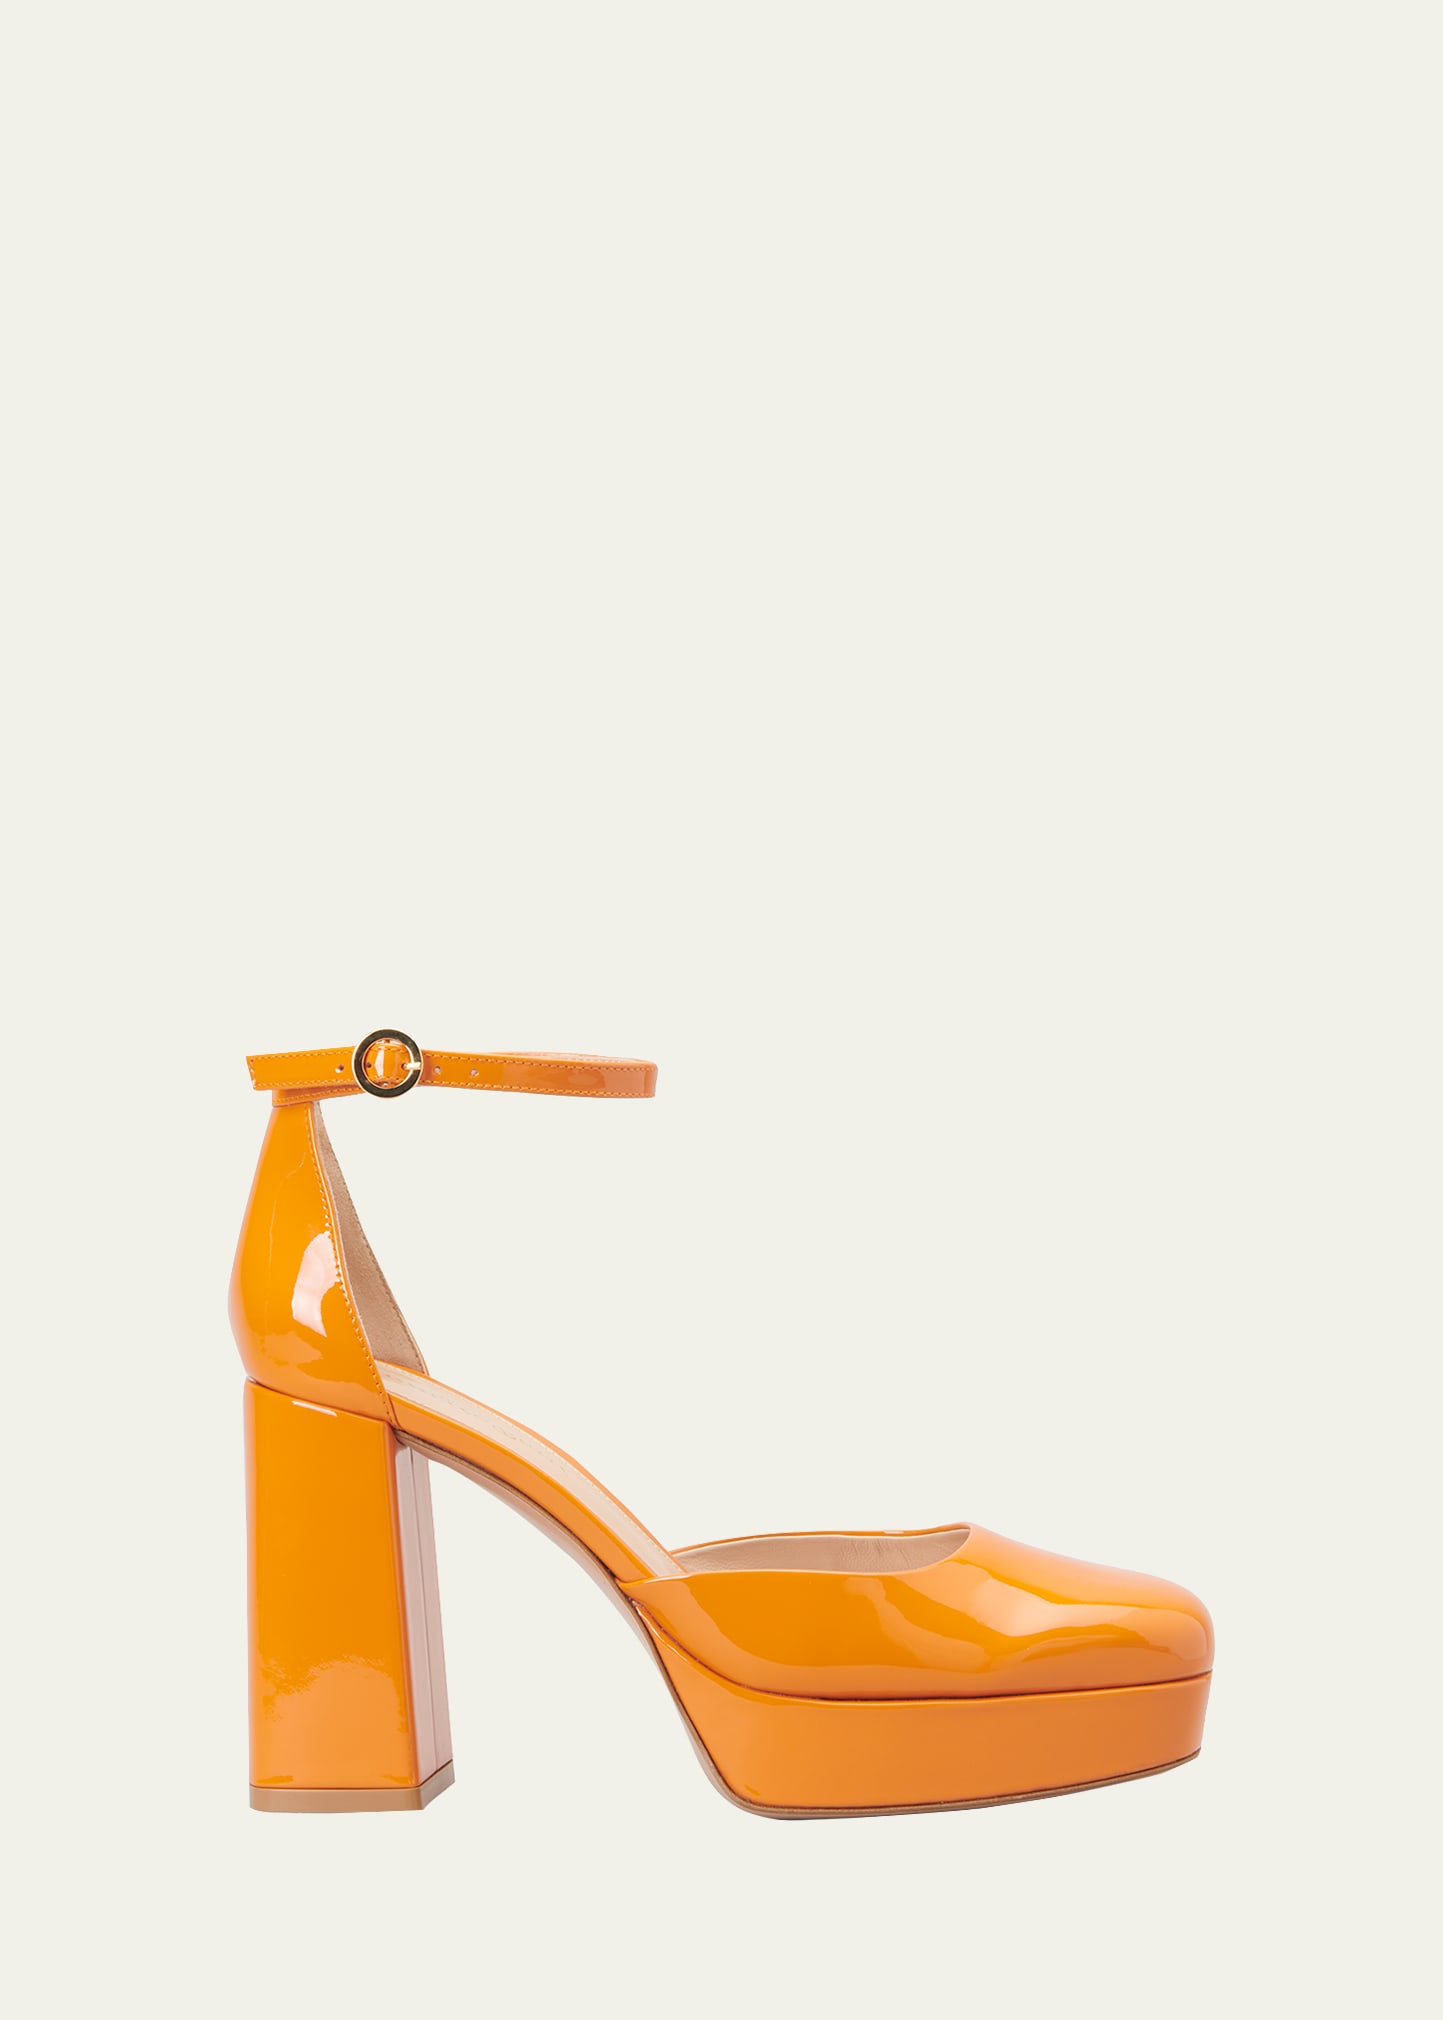 Gianvito Rossi Patent Leather Ankle-Strap Platform Pumps